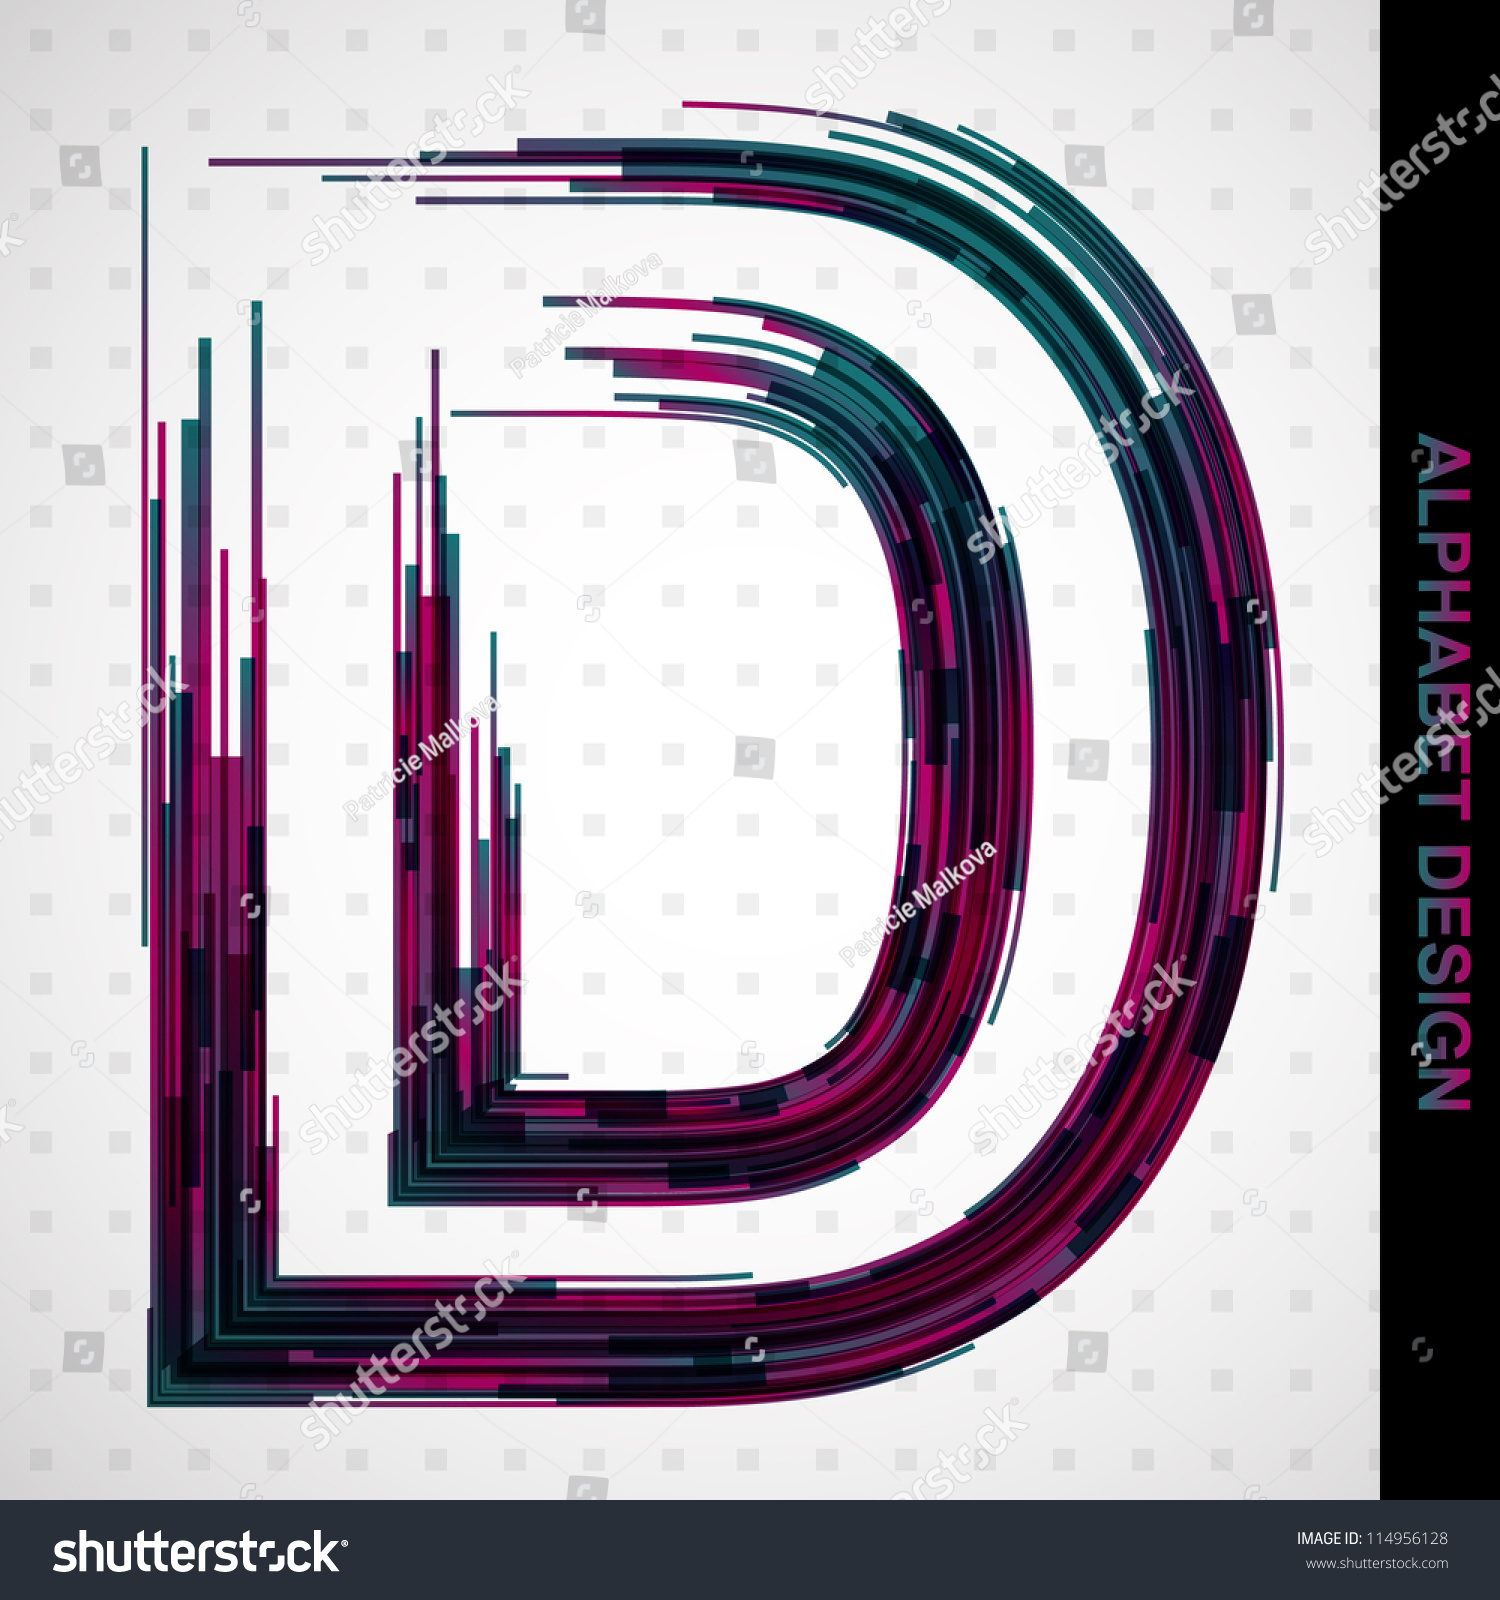 Abstract Vector Letter D From The Alphabet Set - Eps 10 - 114956128 ...